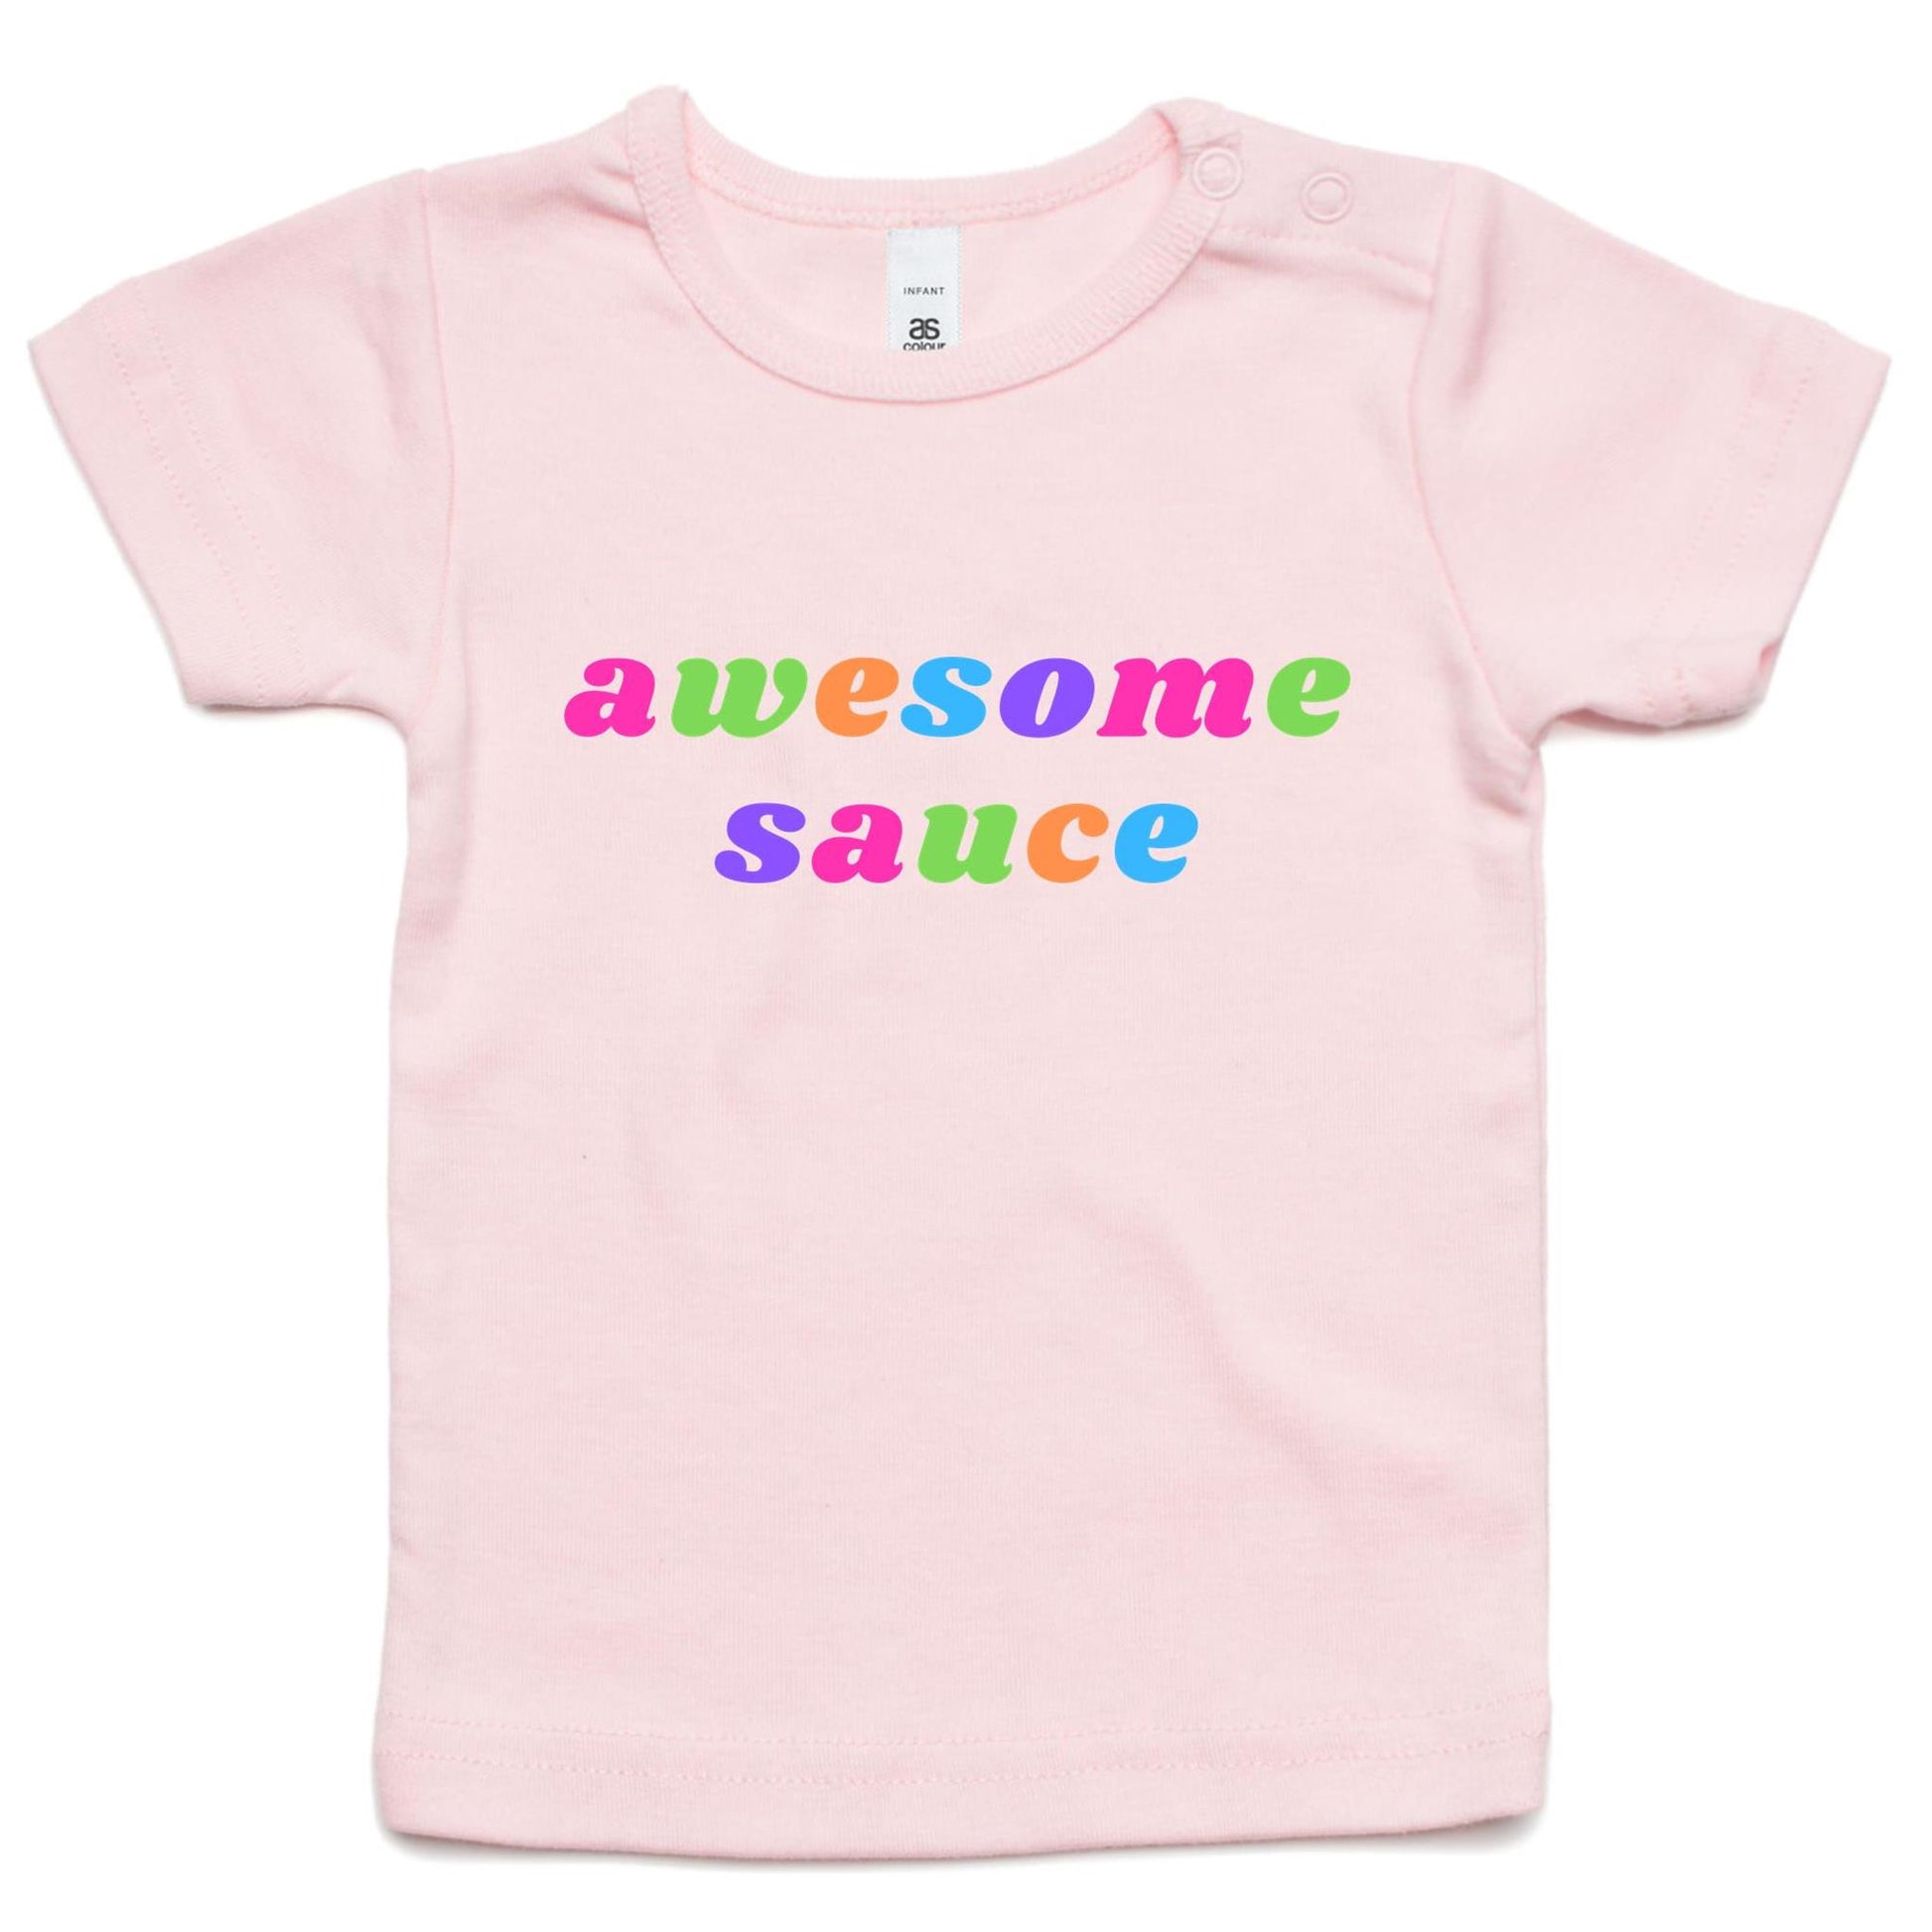 Awesome Sauce - Baby T-shirt Pink Baby T-shirt kids